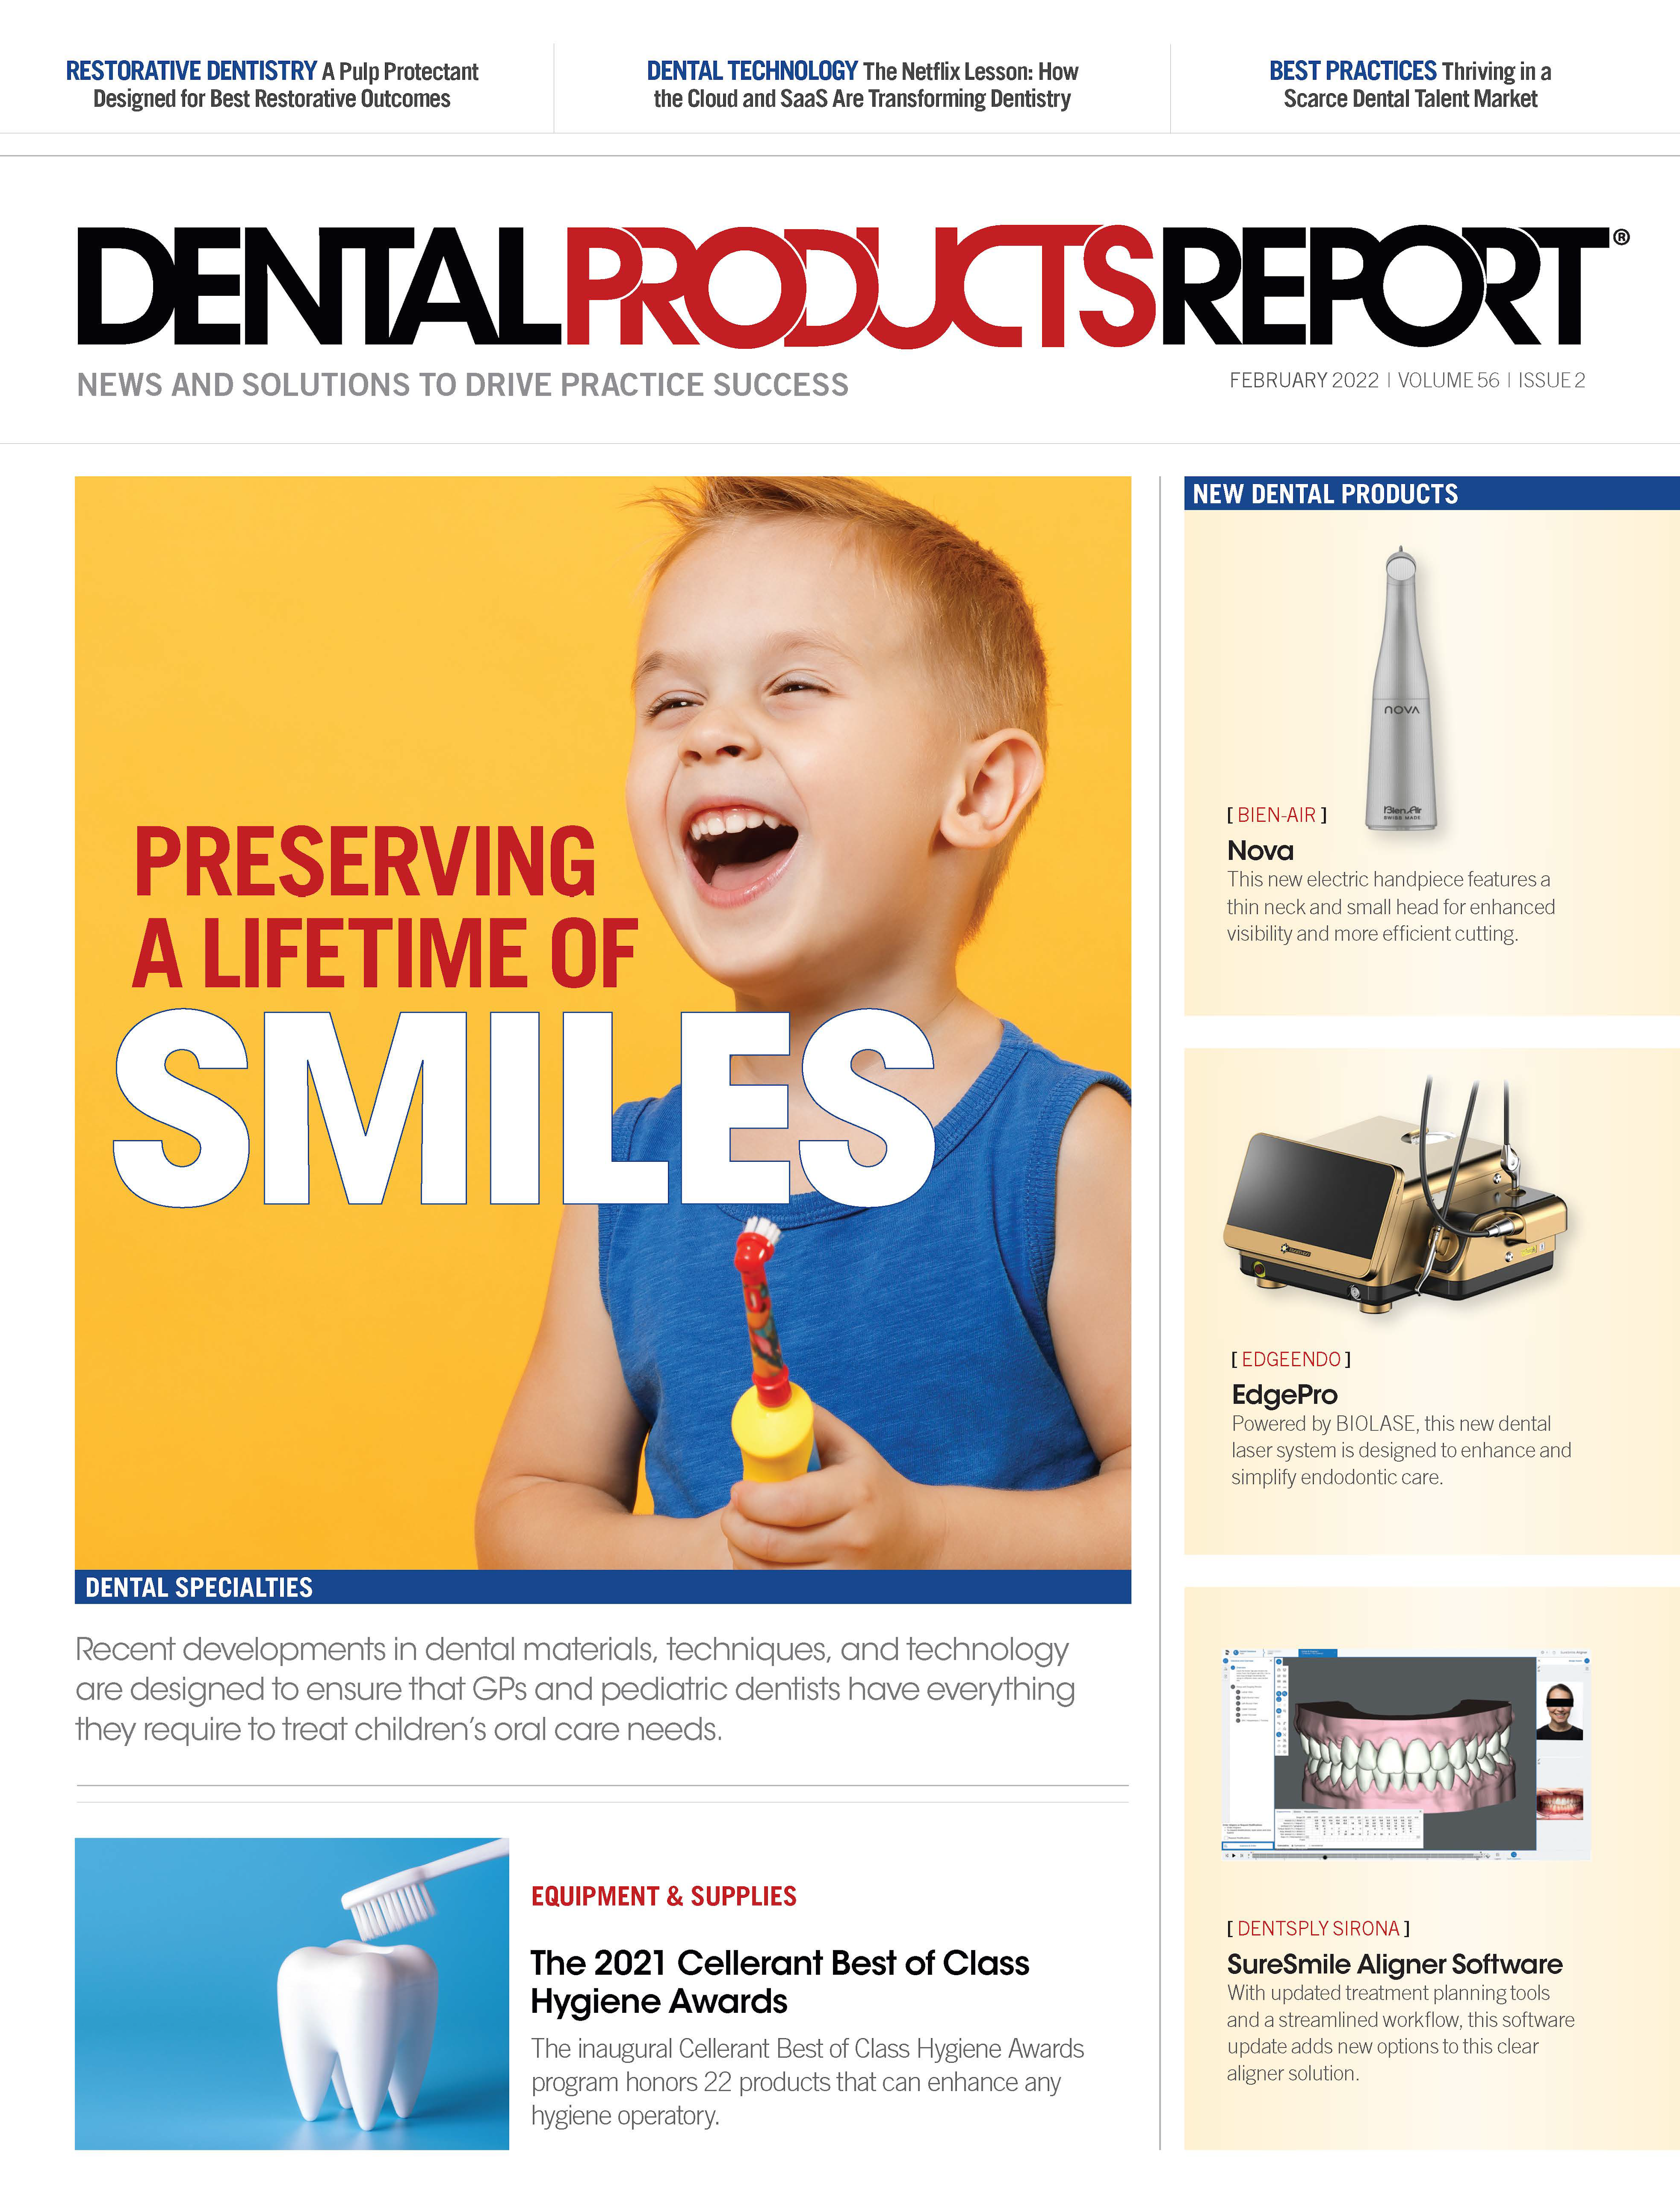 Dental Products Report February 2022 Issue Cover